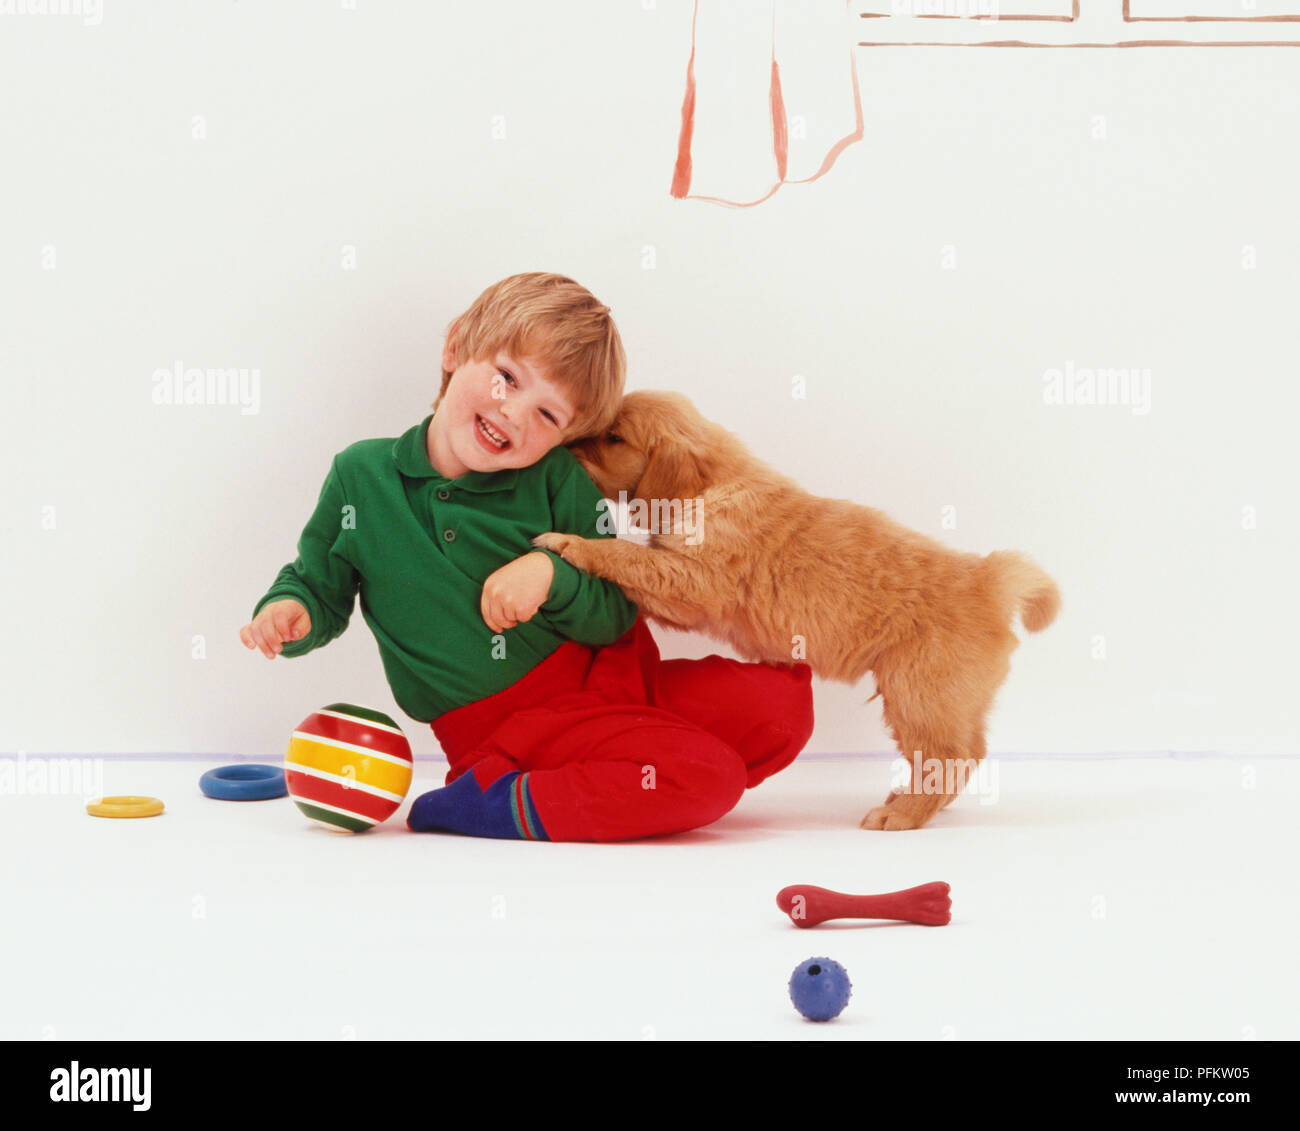 Smiling blonde boy sitting on floor playing with Golden Retriever puppy, dog toys scattered around them on the floor. Stock Photo